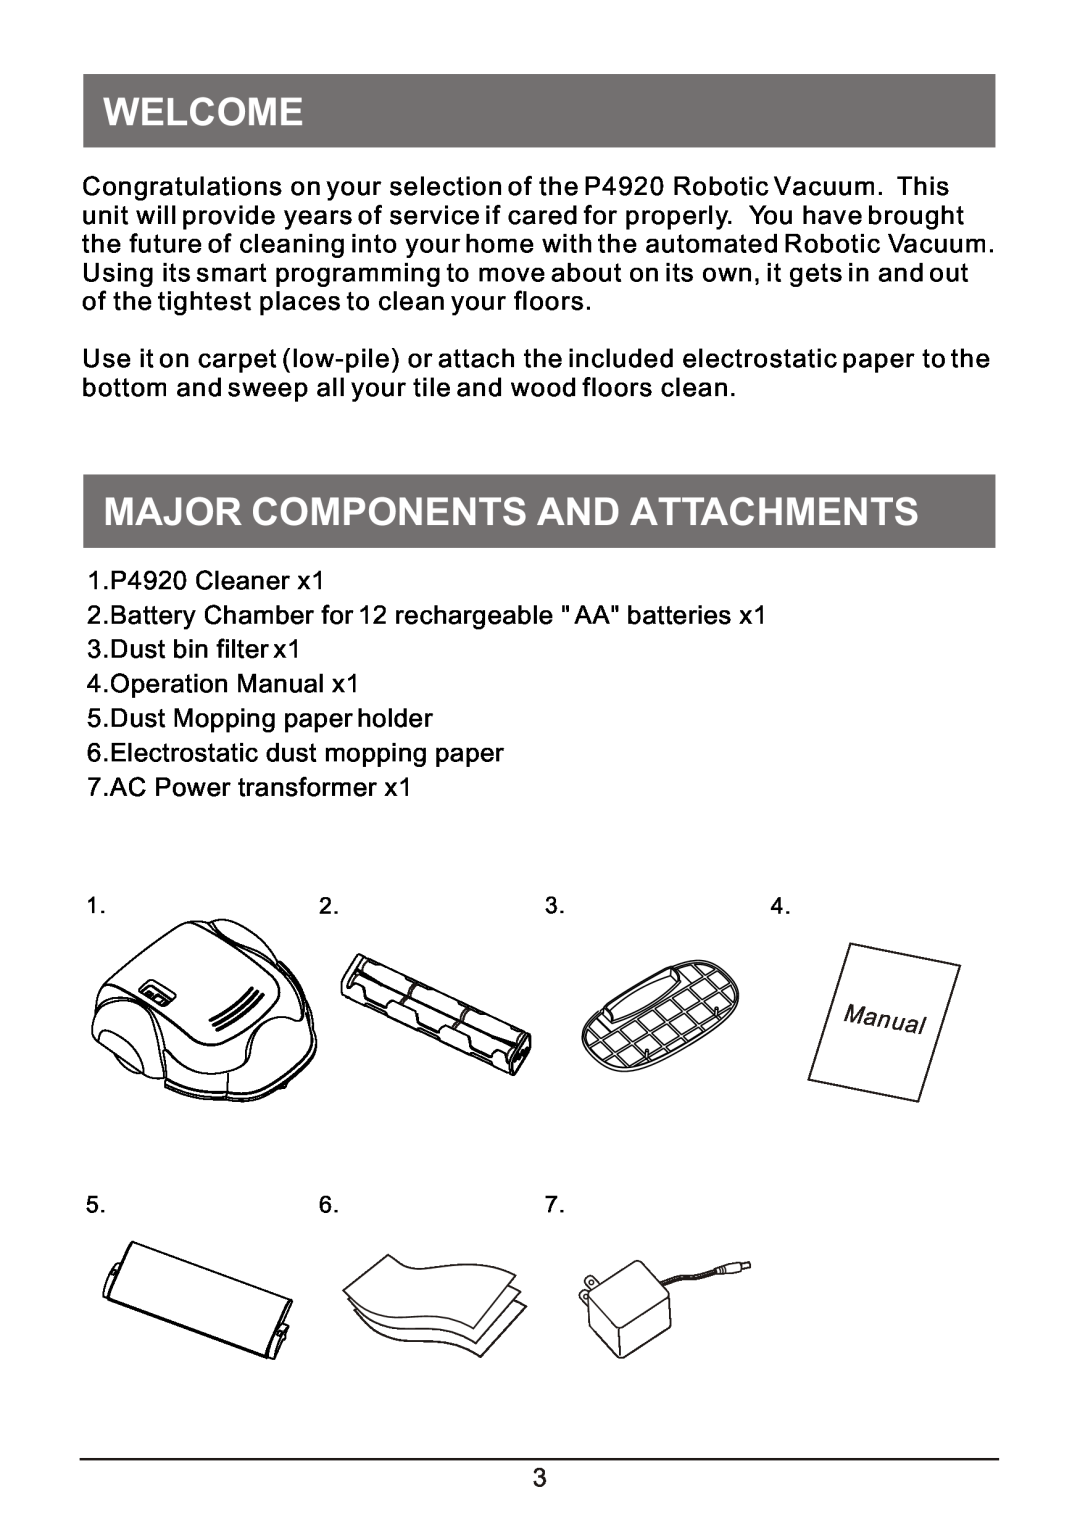 P3 International P4920 operation manual Welcome, Major Components And Attachments 